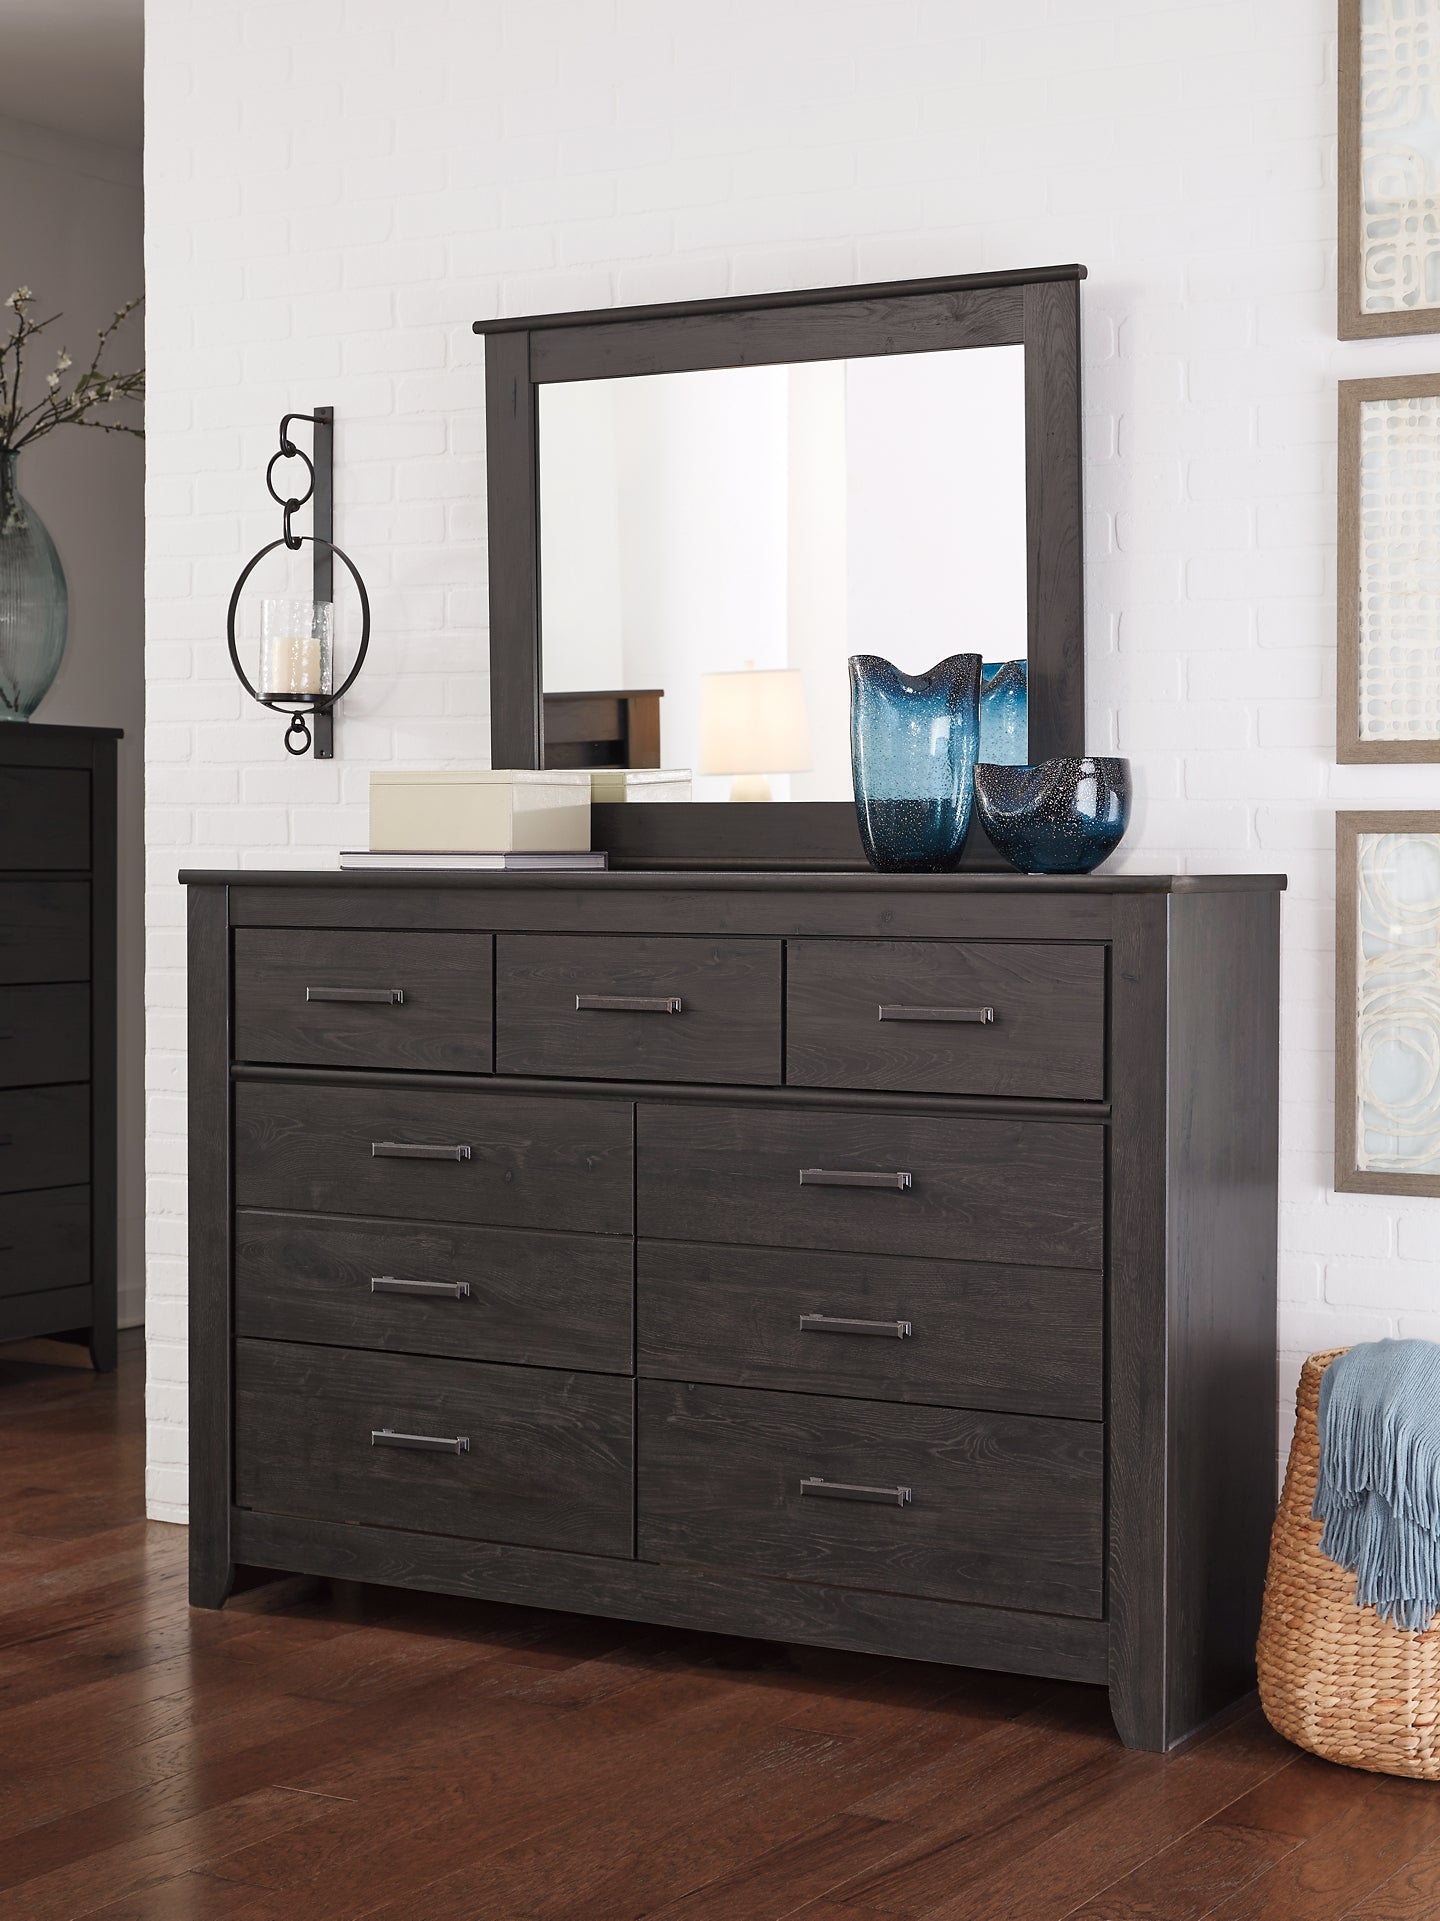 Brinxton King Panel Bed with Mirrored Dresser, Chest and Nightstand